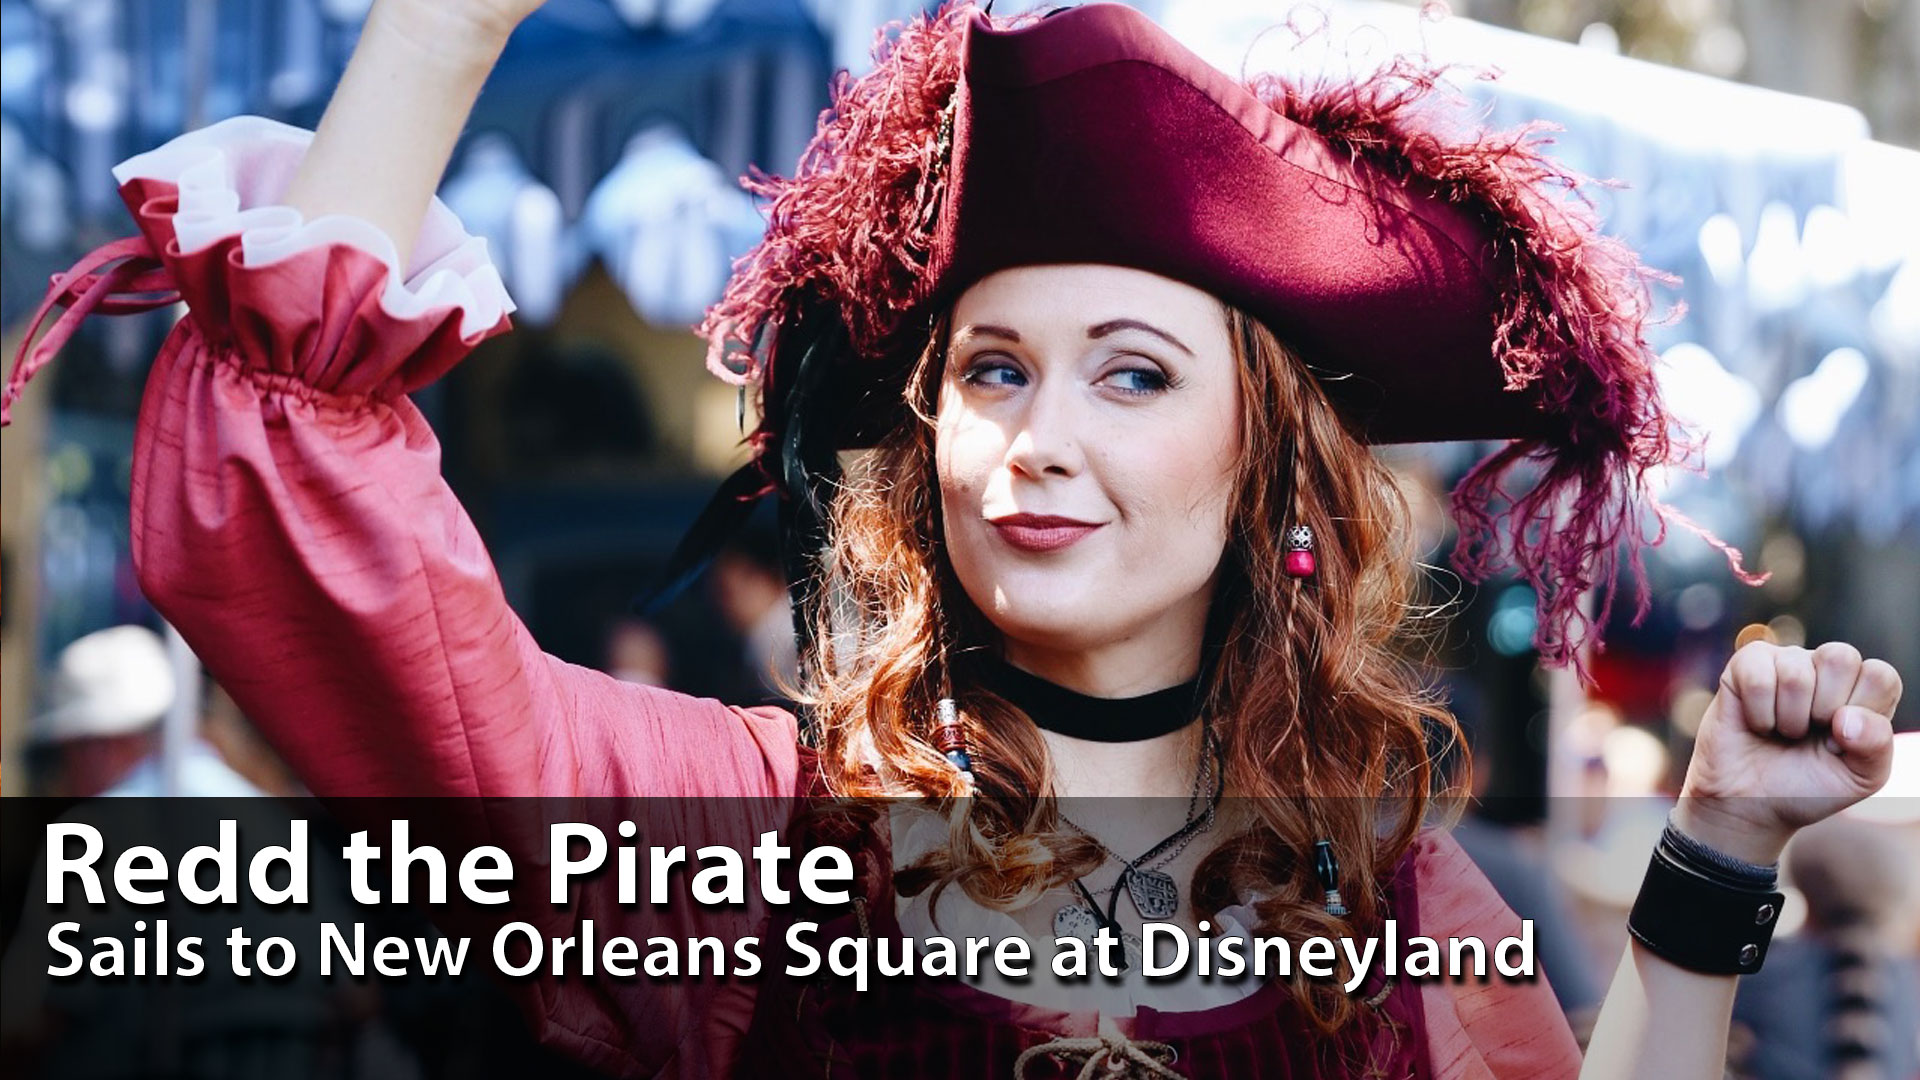 Redd the Pirate Sails into New Orleans Square in Search of Captain Jack Sparrow at Disneyland